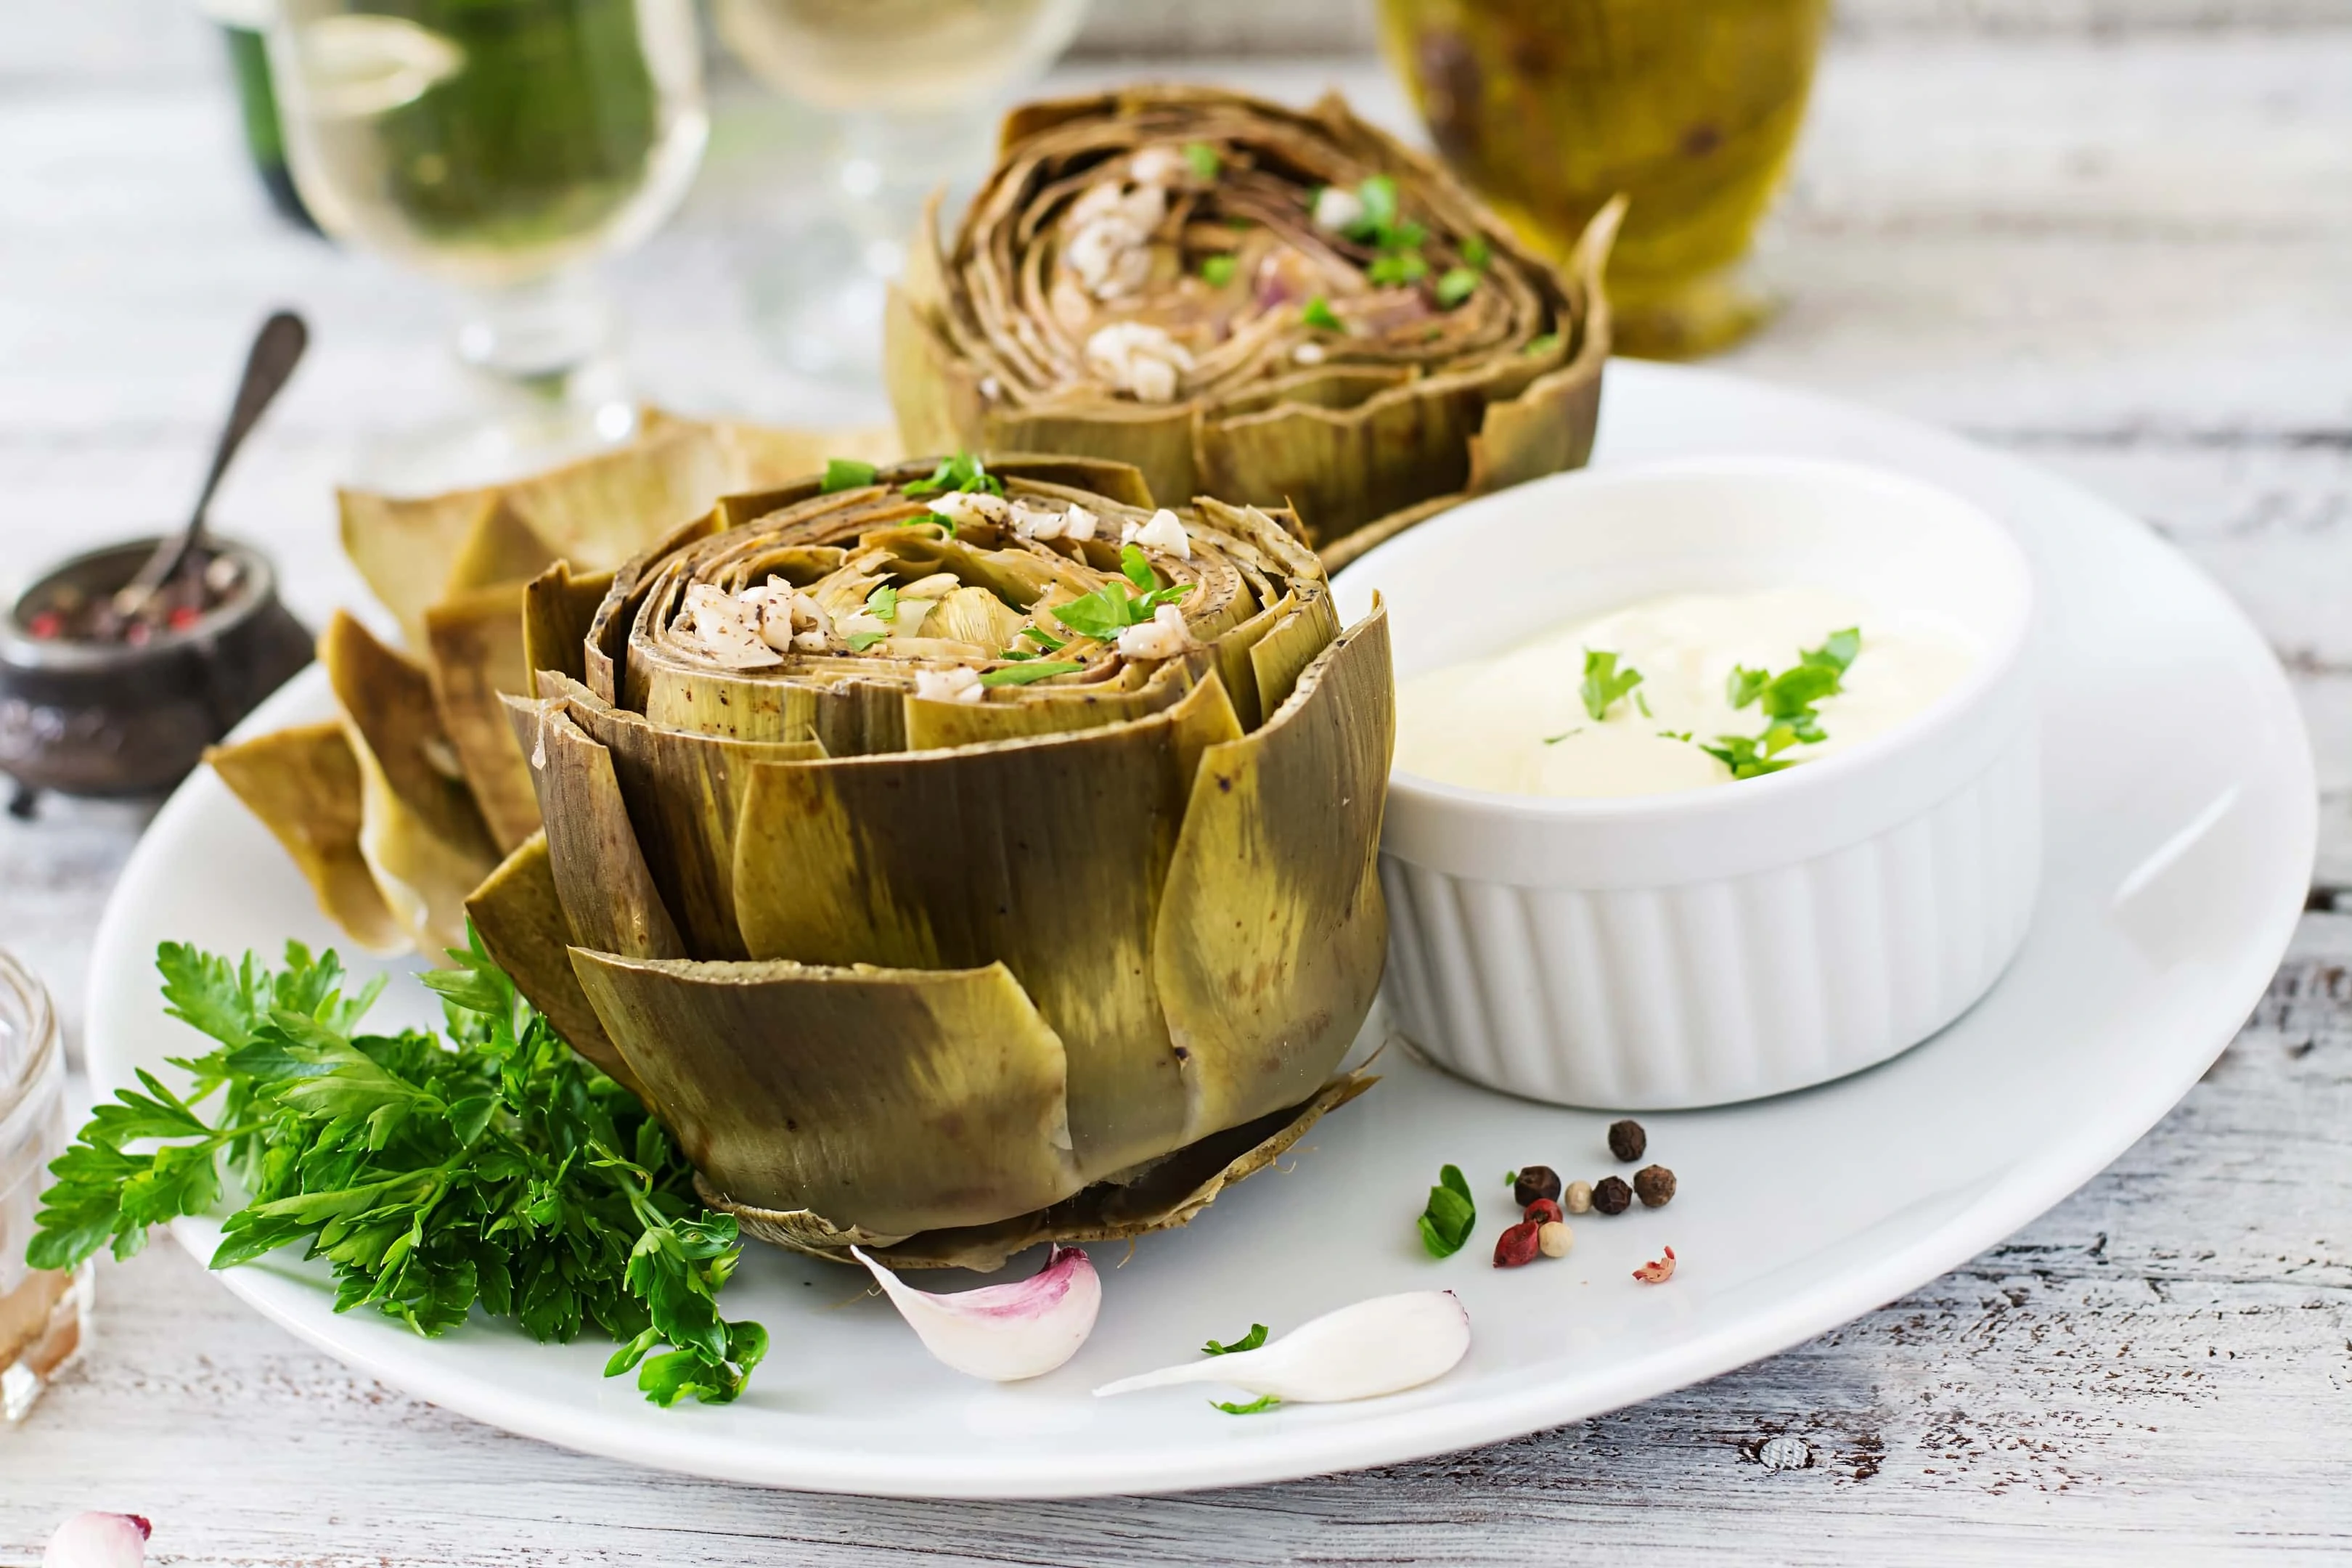 Baked artichokes cooked with mustard garlic